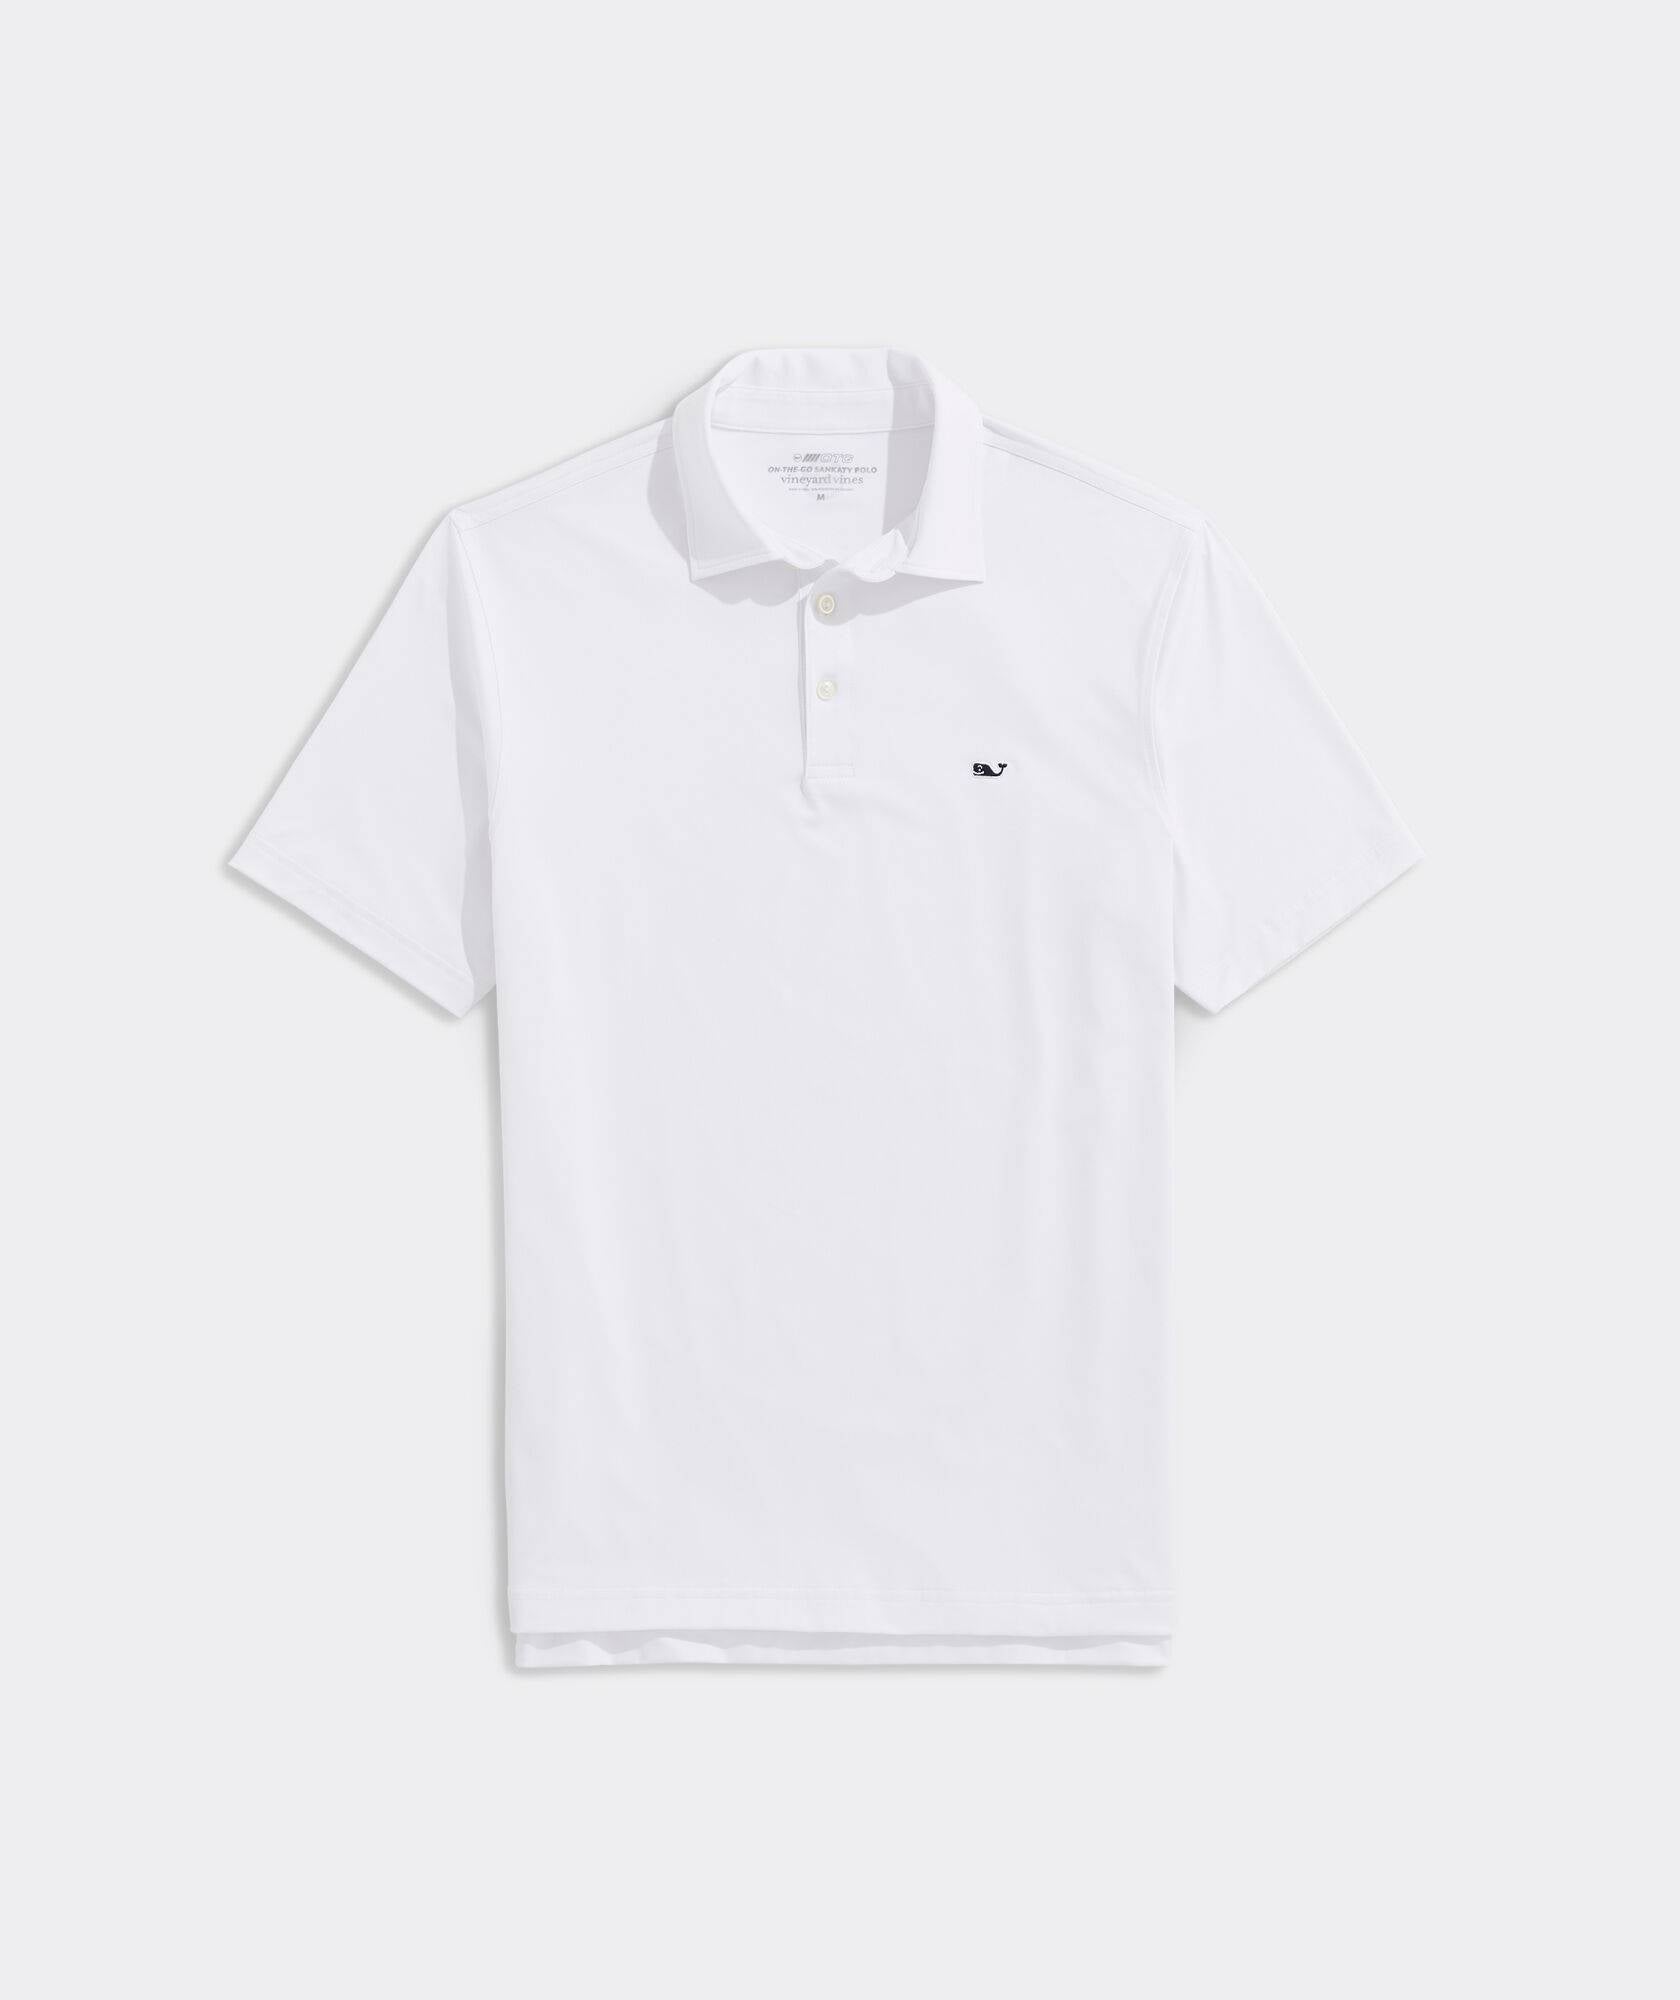 Men's Dunmore Solid Sankaty Polo, full front view.